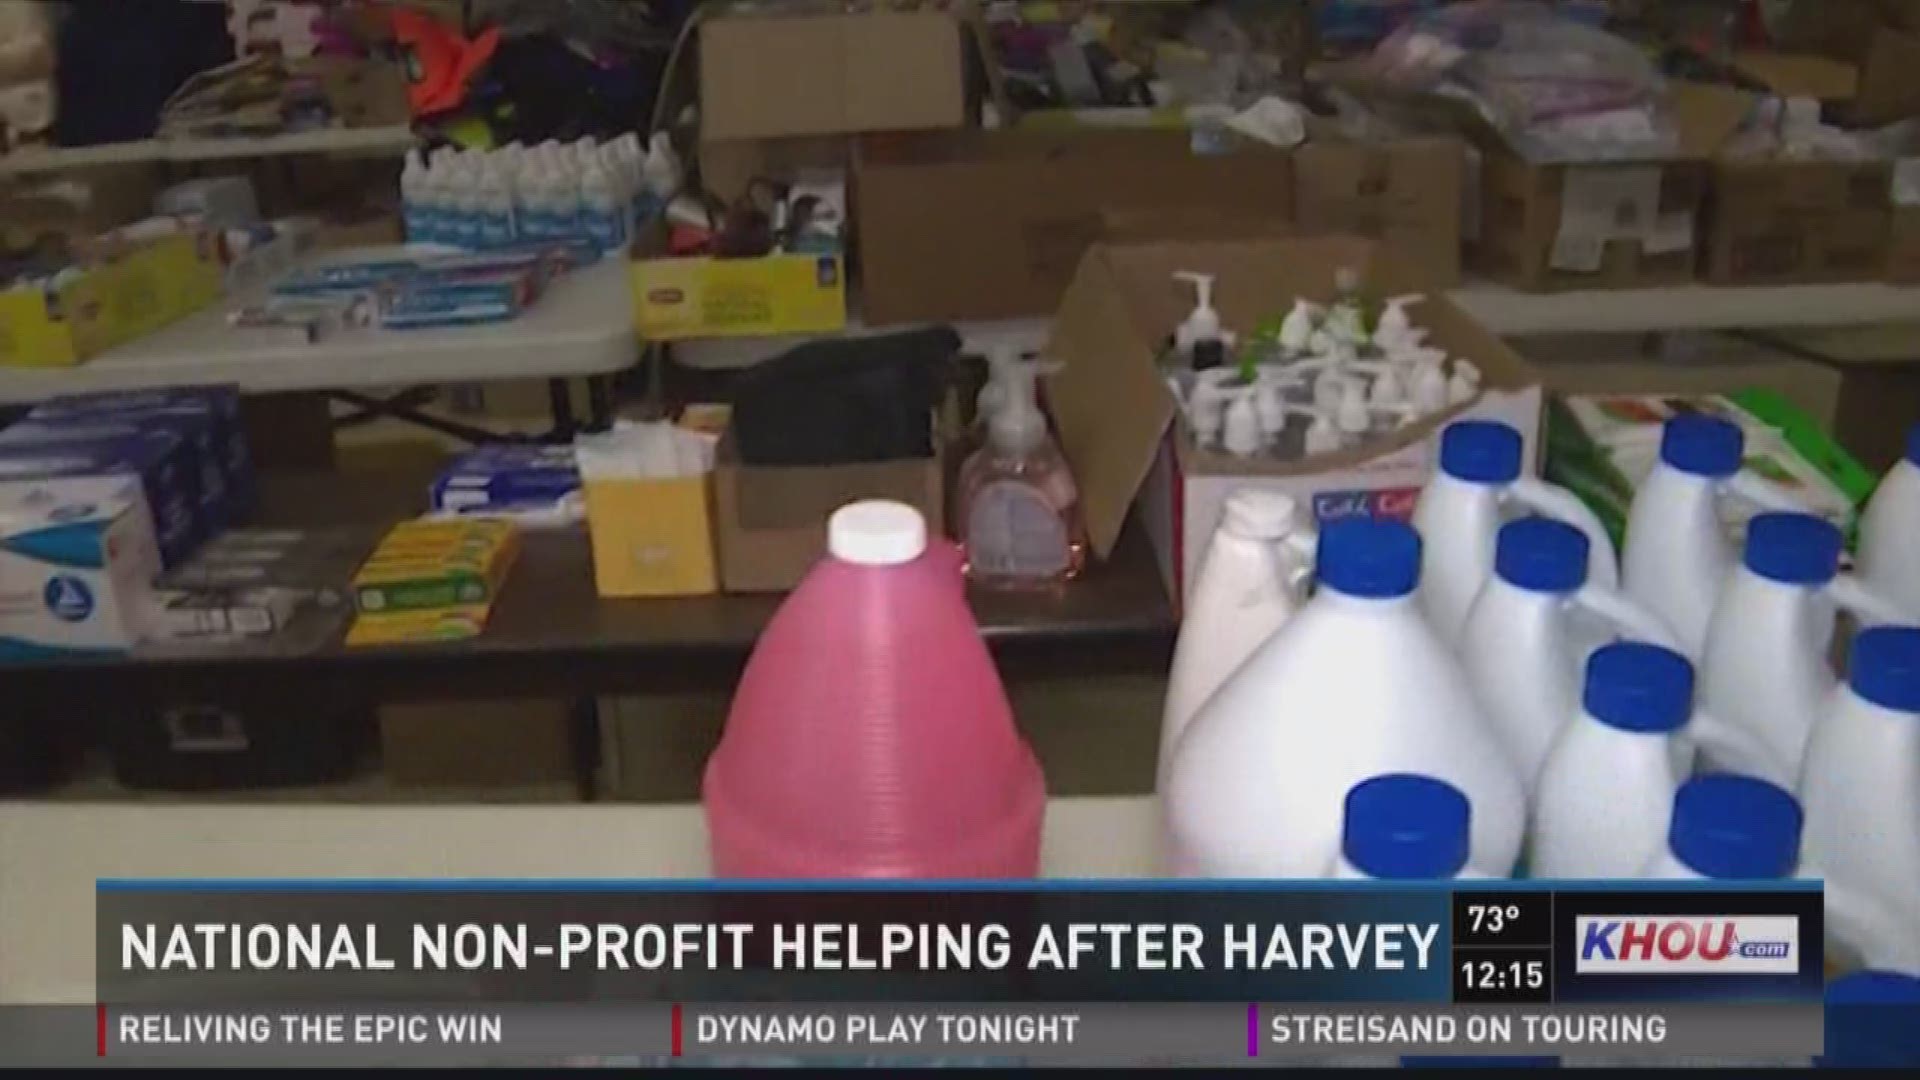 KHOU 11's Sherry Williams reports on Good360 - a national non-profit helping after Harvey